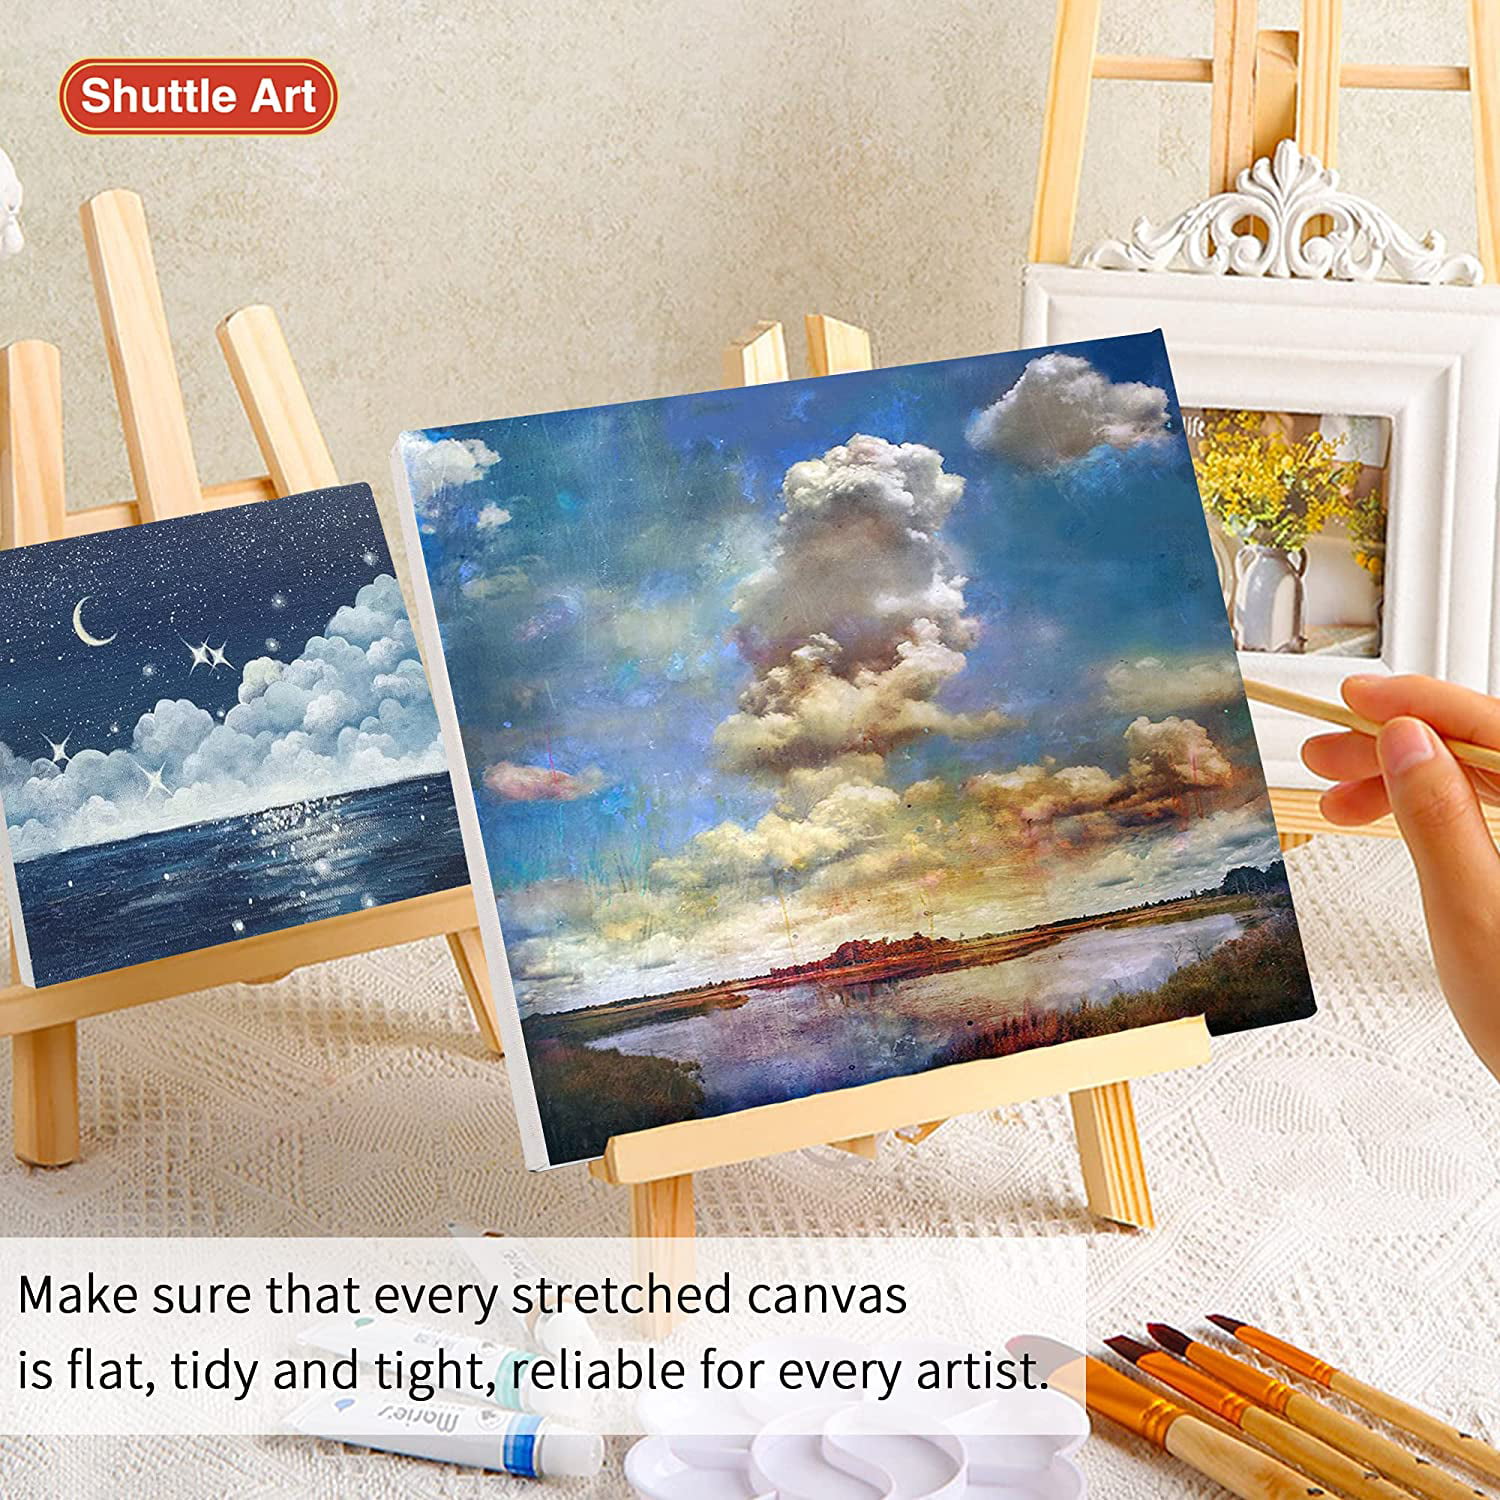 Shuttle Art Painting Canvas Panels, 36 Pack, 5x7, 8x10in (18 of Each), 100%  Cotton, Primed White Canvas Boards for Painting, Blank Canvases for Kids